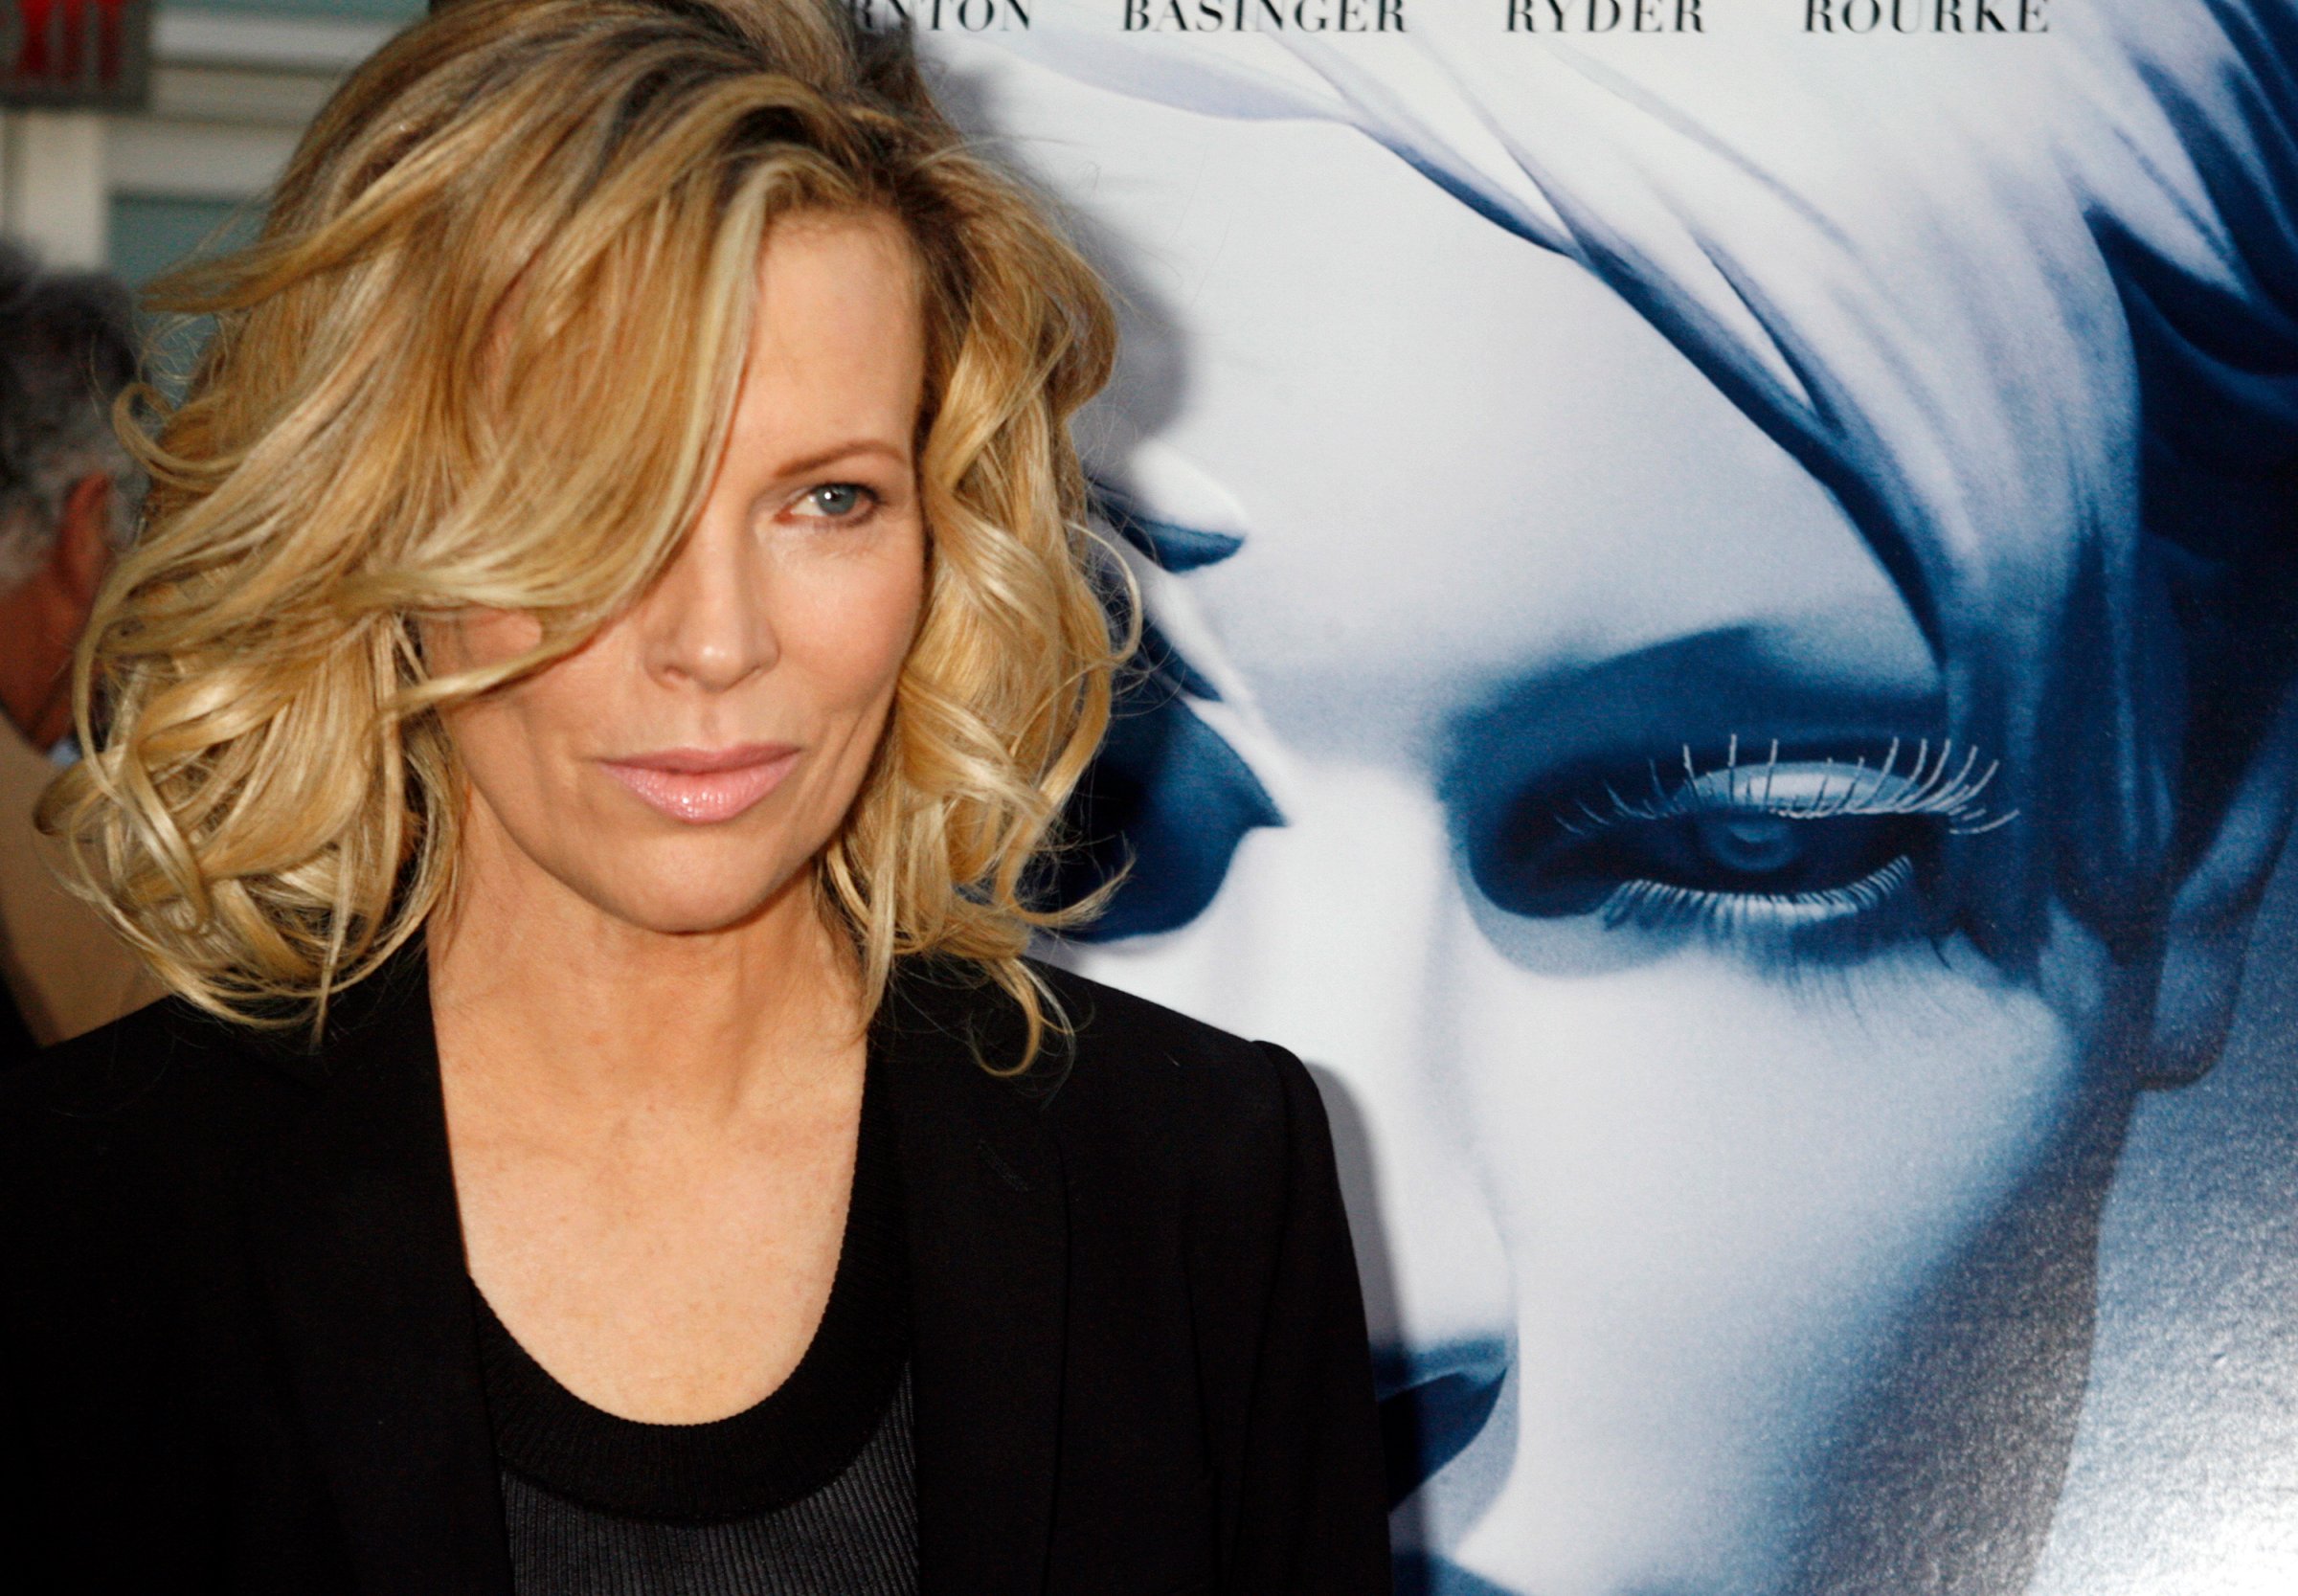 Actress Kim Basinger, star of the film "The Informers", poses at the film's premiere in Hollywood